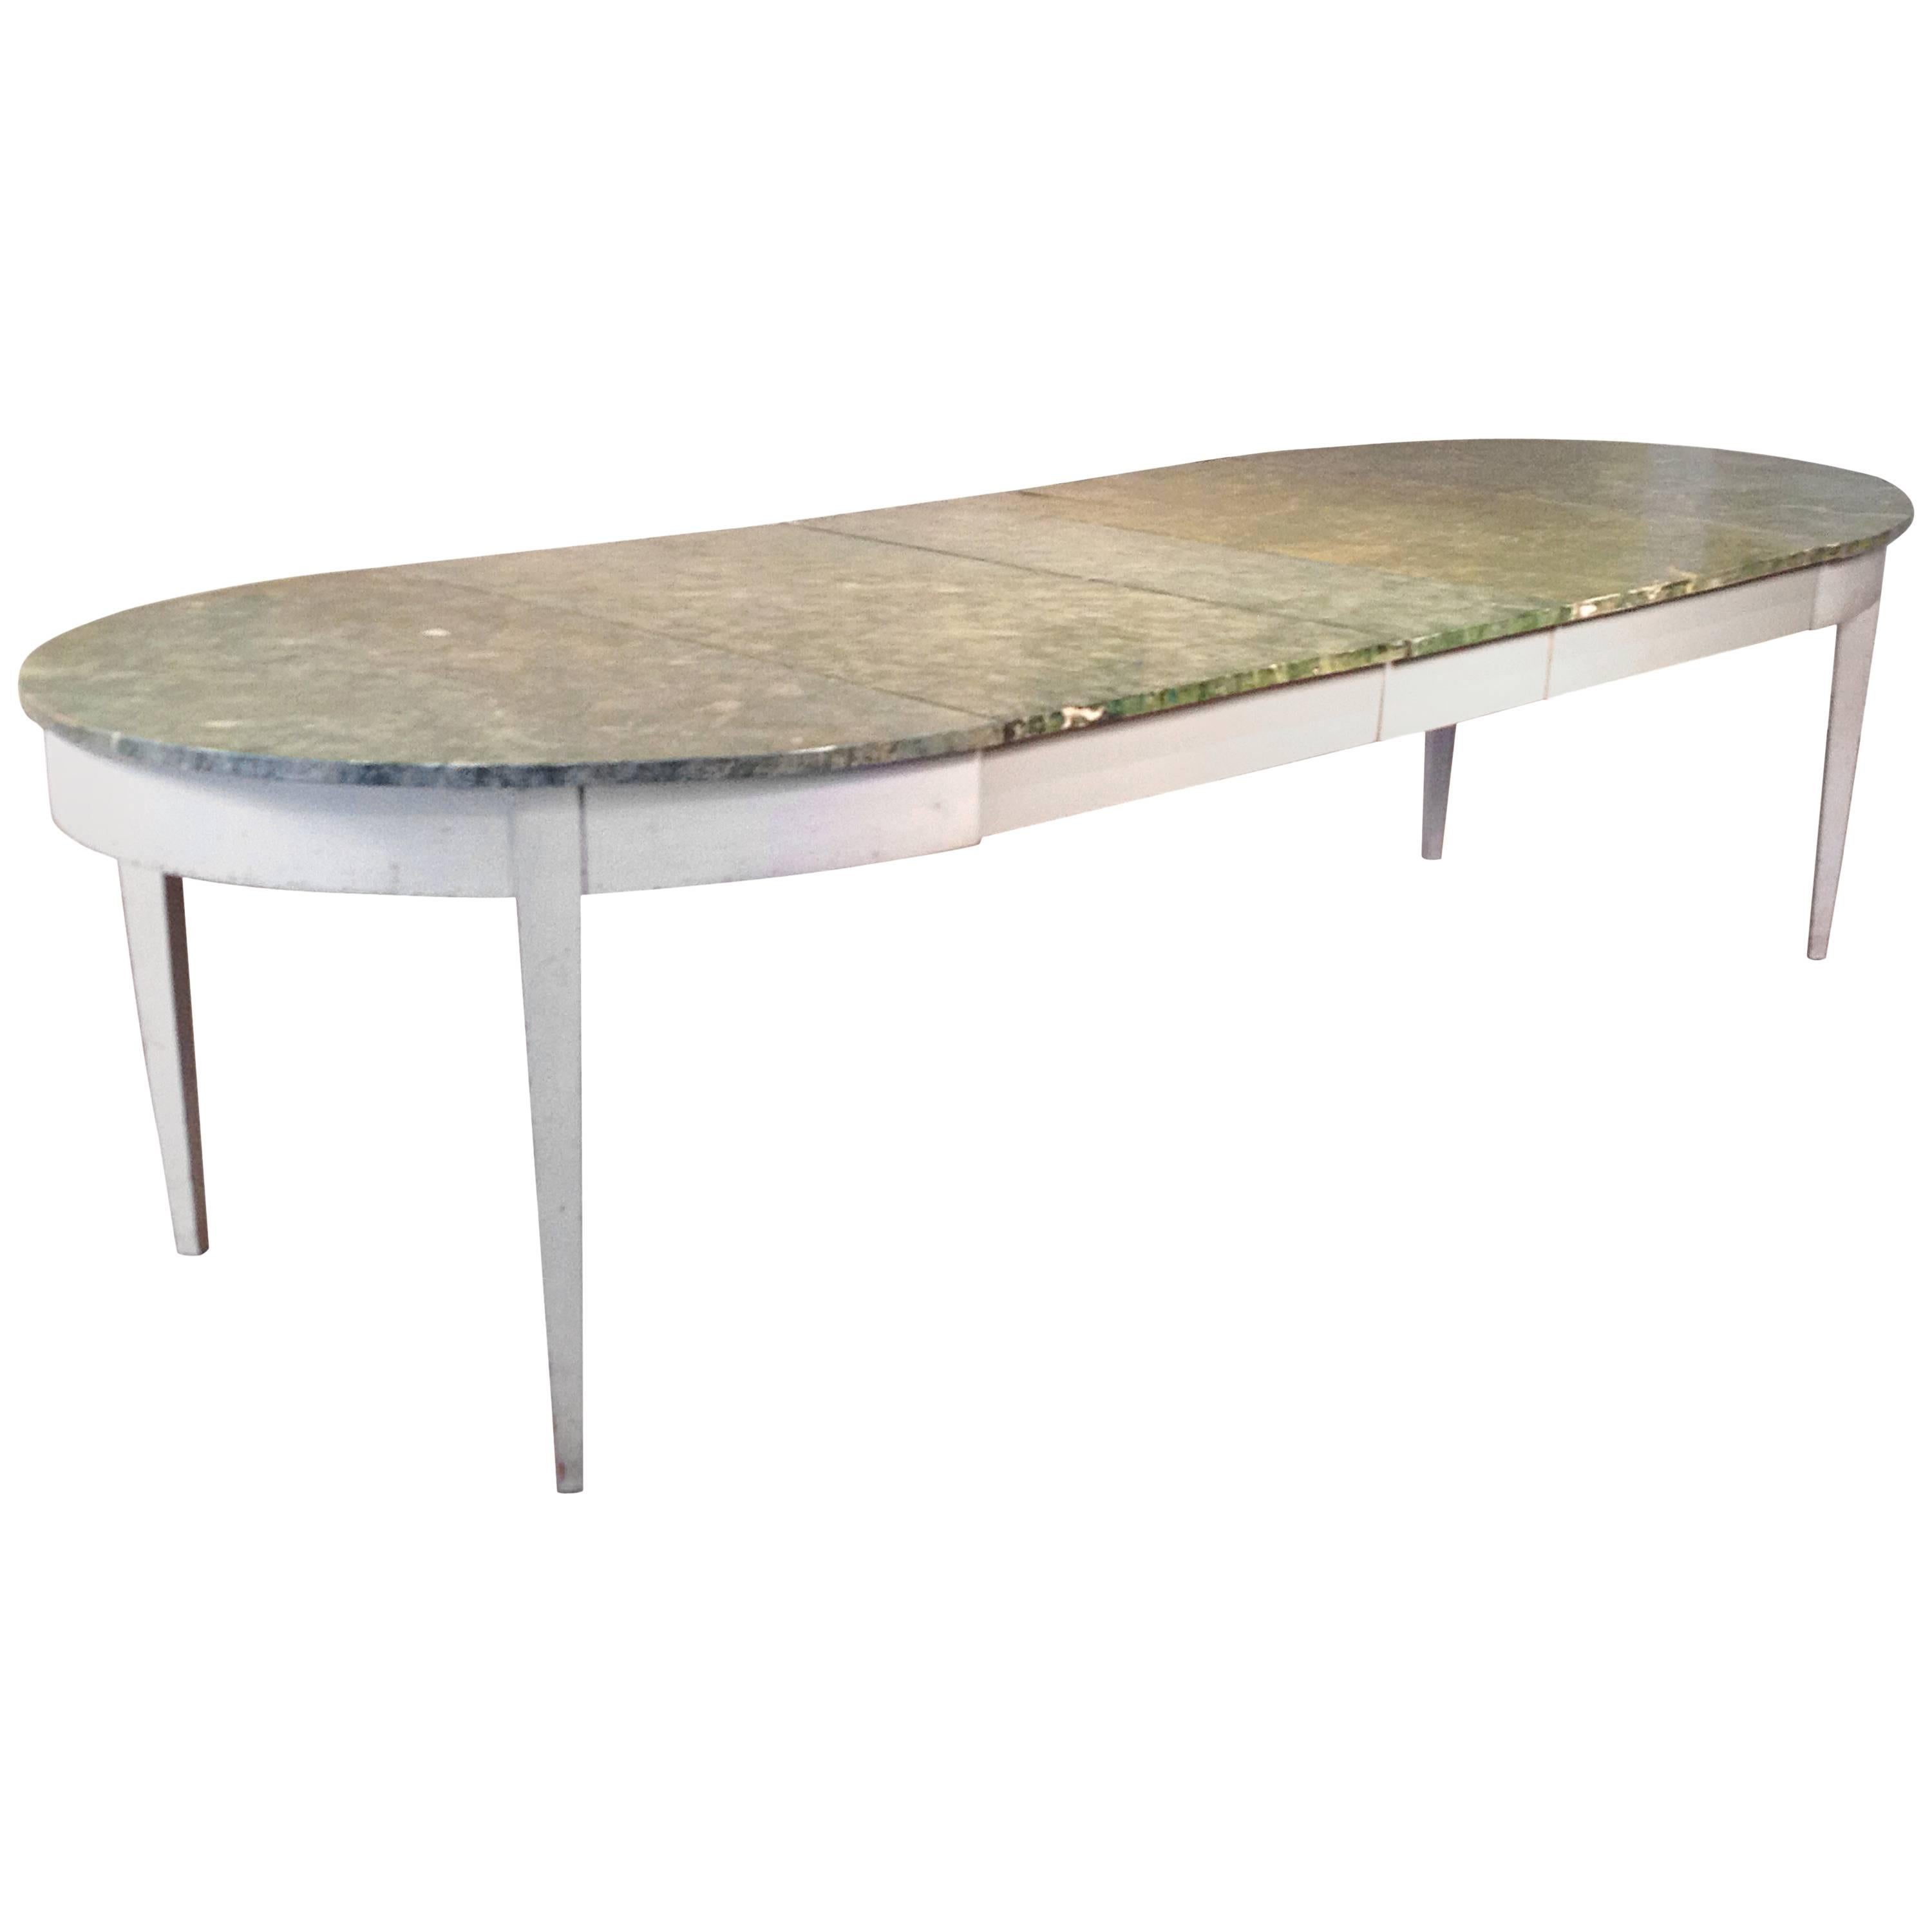 Antique 19th Century Swedish Extending Oval Dining Table with Faux Marble Top For Sale